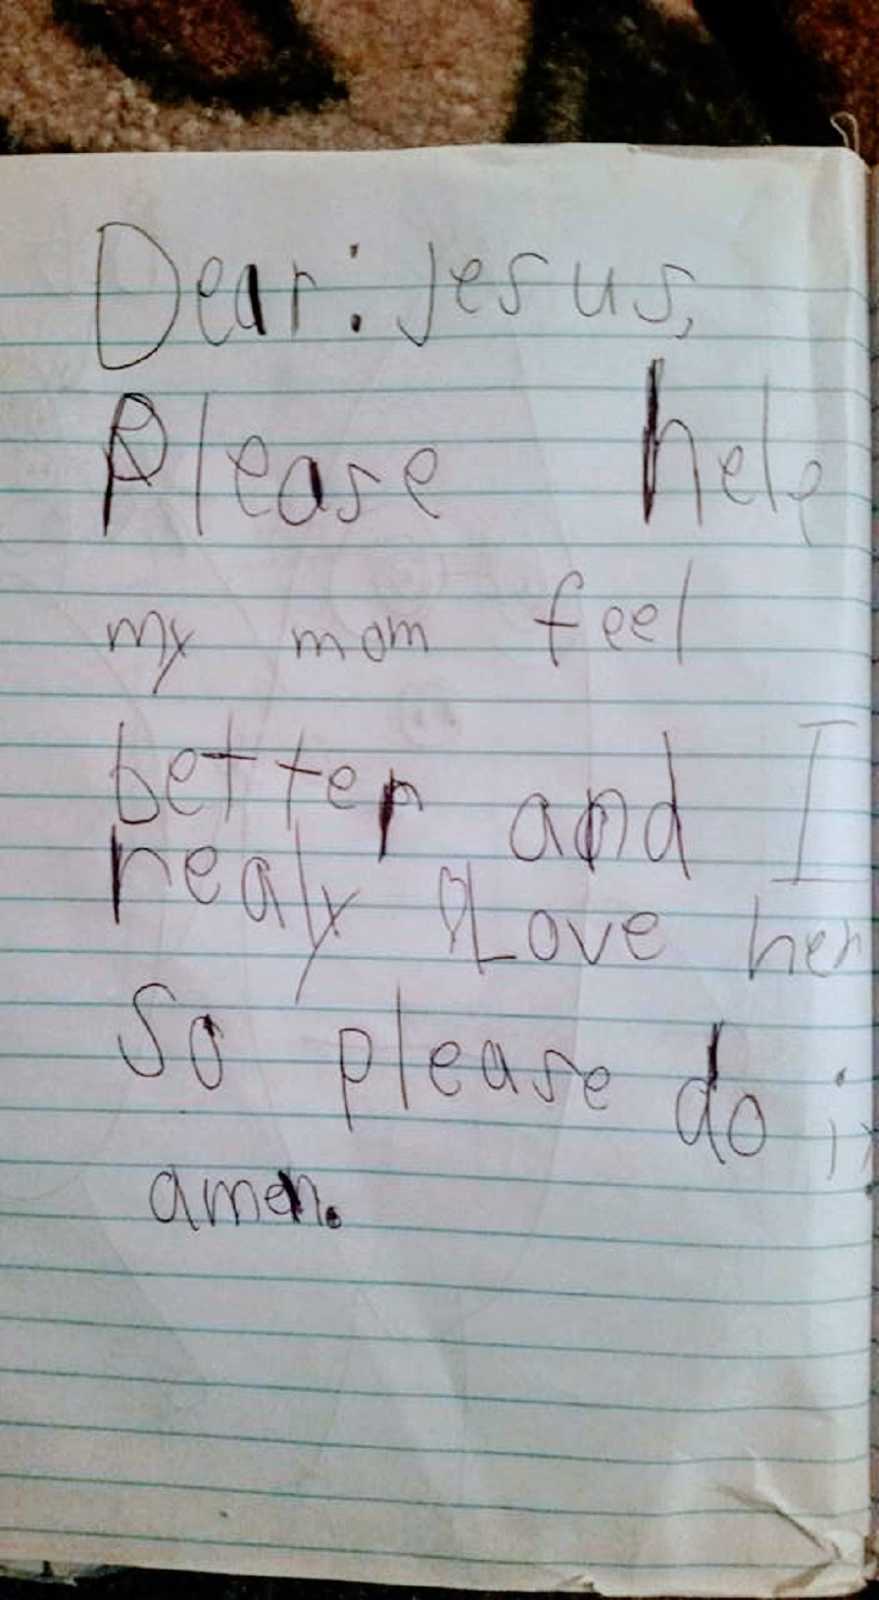 A boy's handwritten note praying for his mother's health